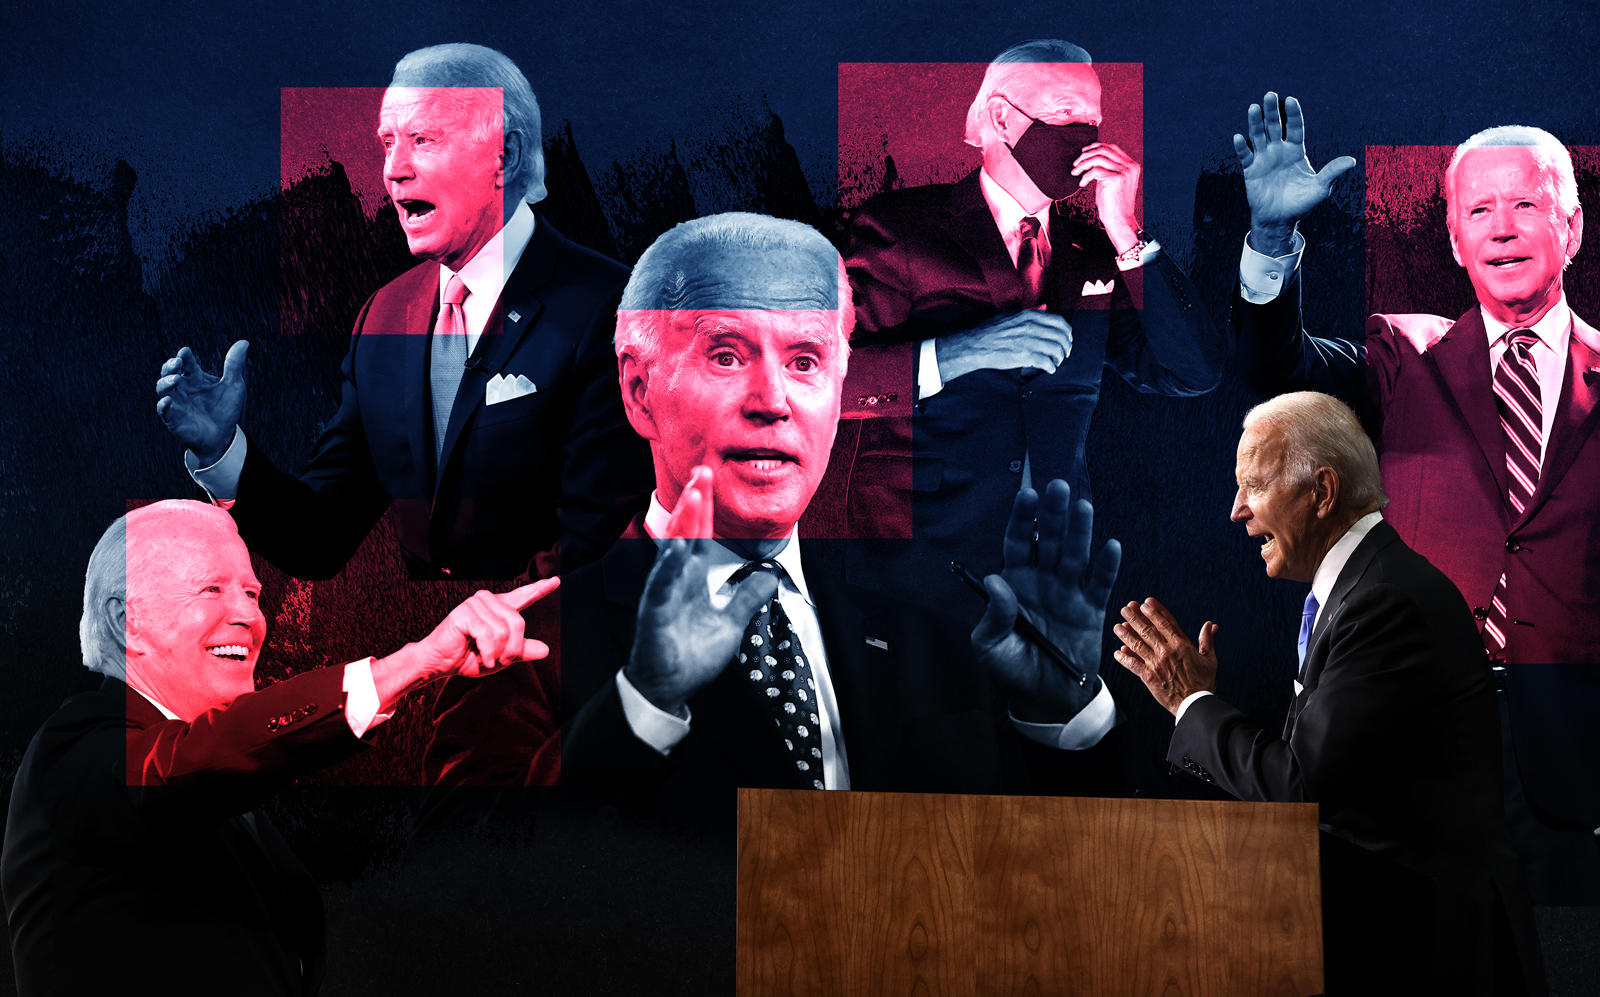 Democratic presidential nominee Joe Biden has laid out changes he would make to programs and policies beloved by the real estate industry. (Photos via Getty Images)